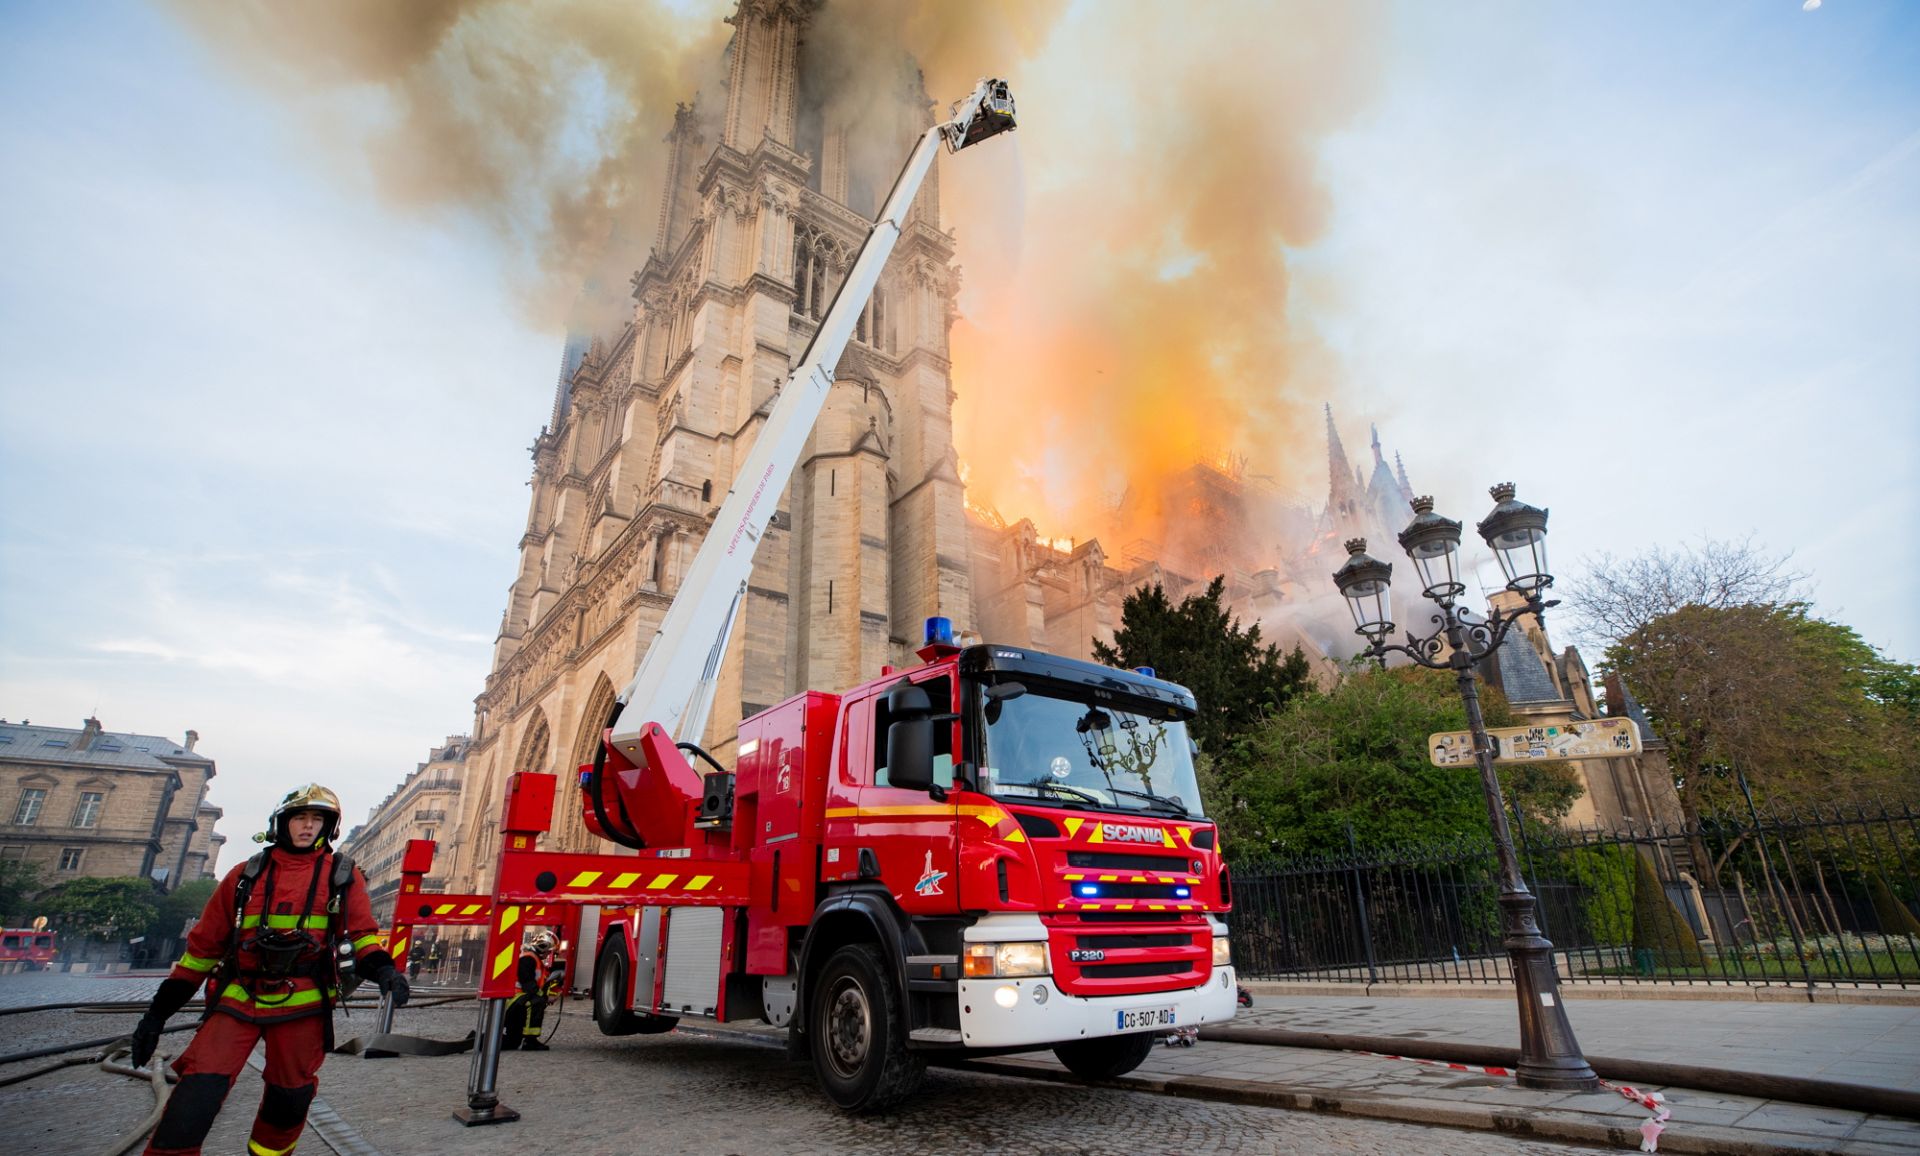 epa07509691 A handout photo made available by the Brigade de Sapeurs-Pompiers de Paris (BSPP) on 16 April 2019 shows French fire fighters in operation to extinguish a fire burning the roof of the Notre-Dame Cathedral in Paris, France, 15 April 2019. A fire started in the late afternoon in one of the most visited monuments of the French capital.  EPA/BENOIT MOSER / BSPP / HANDOUT  HANDOUT EDITORIAL USE ONLY/NO SALES